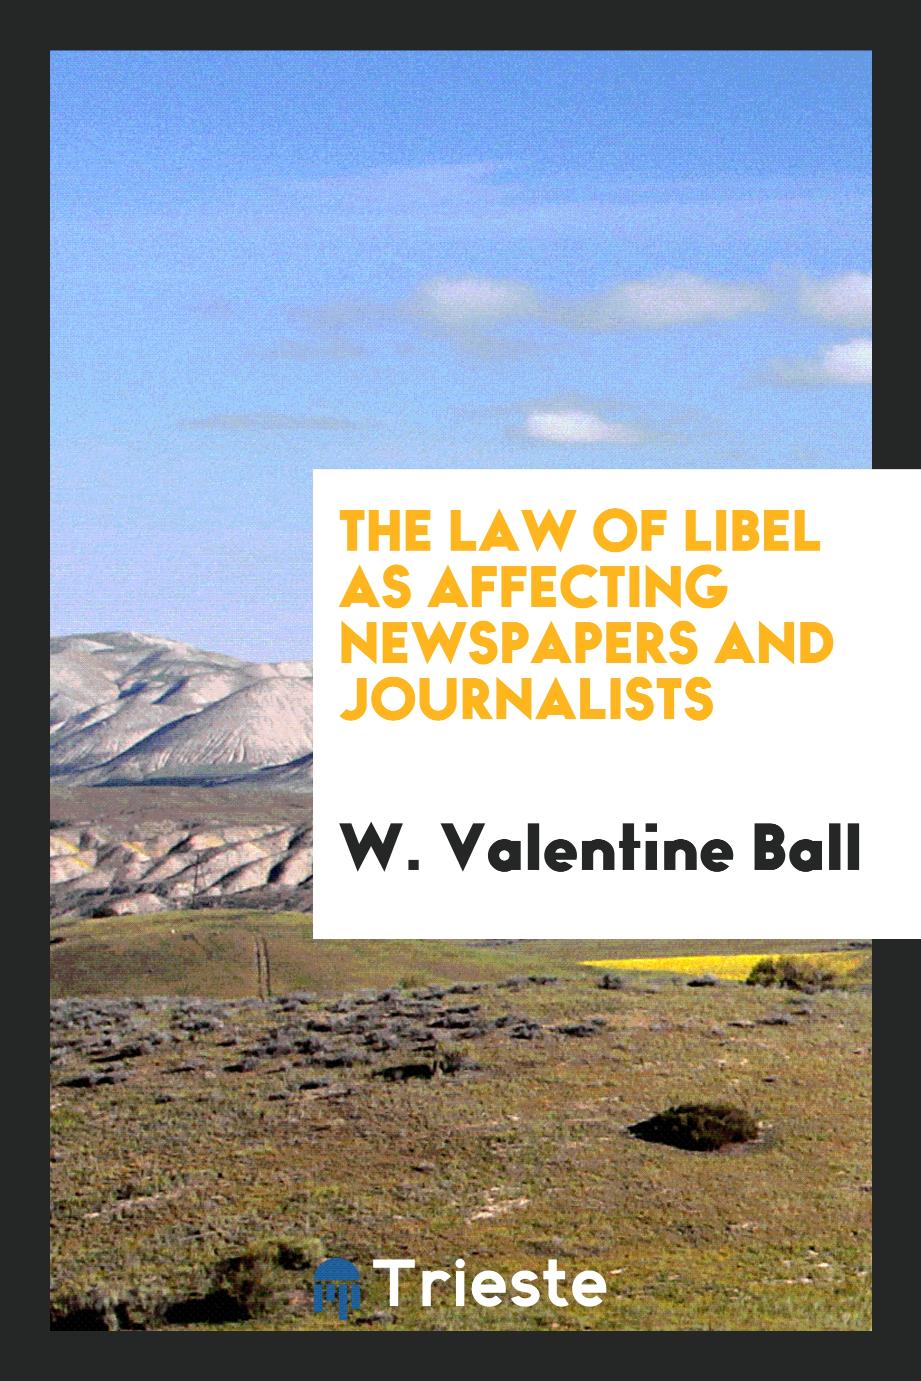 The law of libel as affecting newspapers and journalists